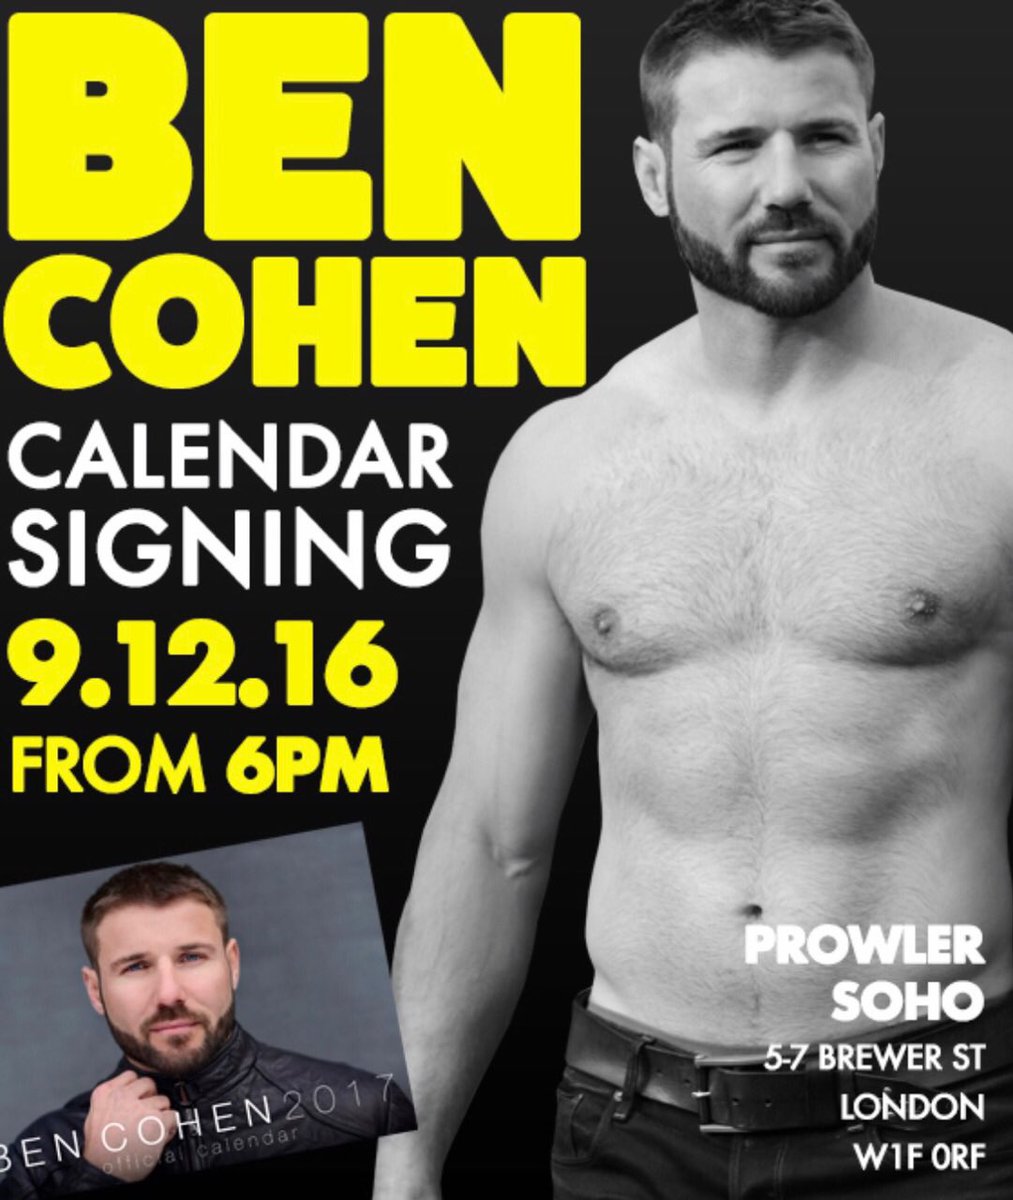 Ben Cohen On Twitter I Ll Be Prowlerstores The Soho Store On 9 12 16 I Ll Be Signing Copies Of My 2017 Calendar